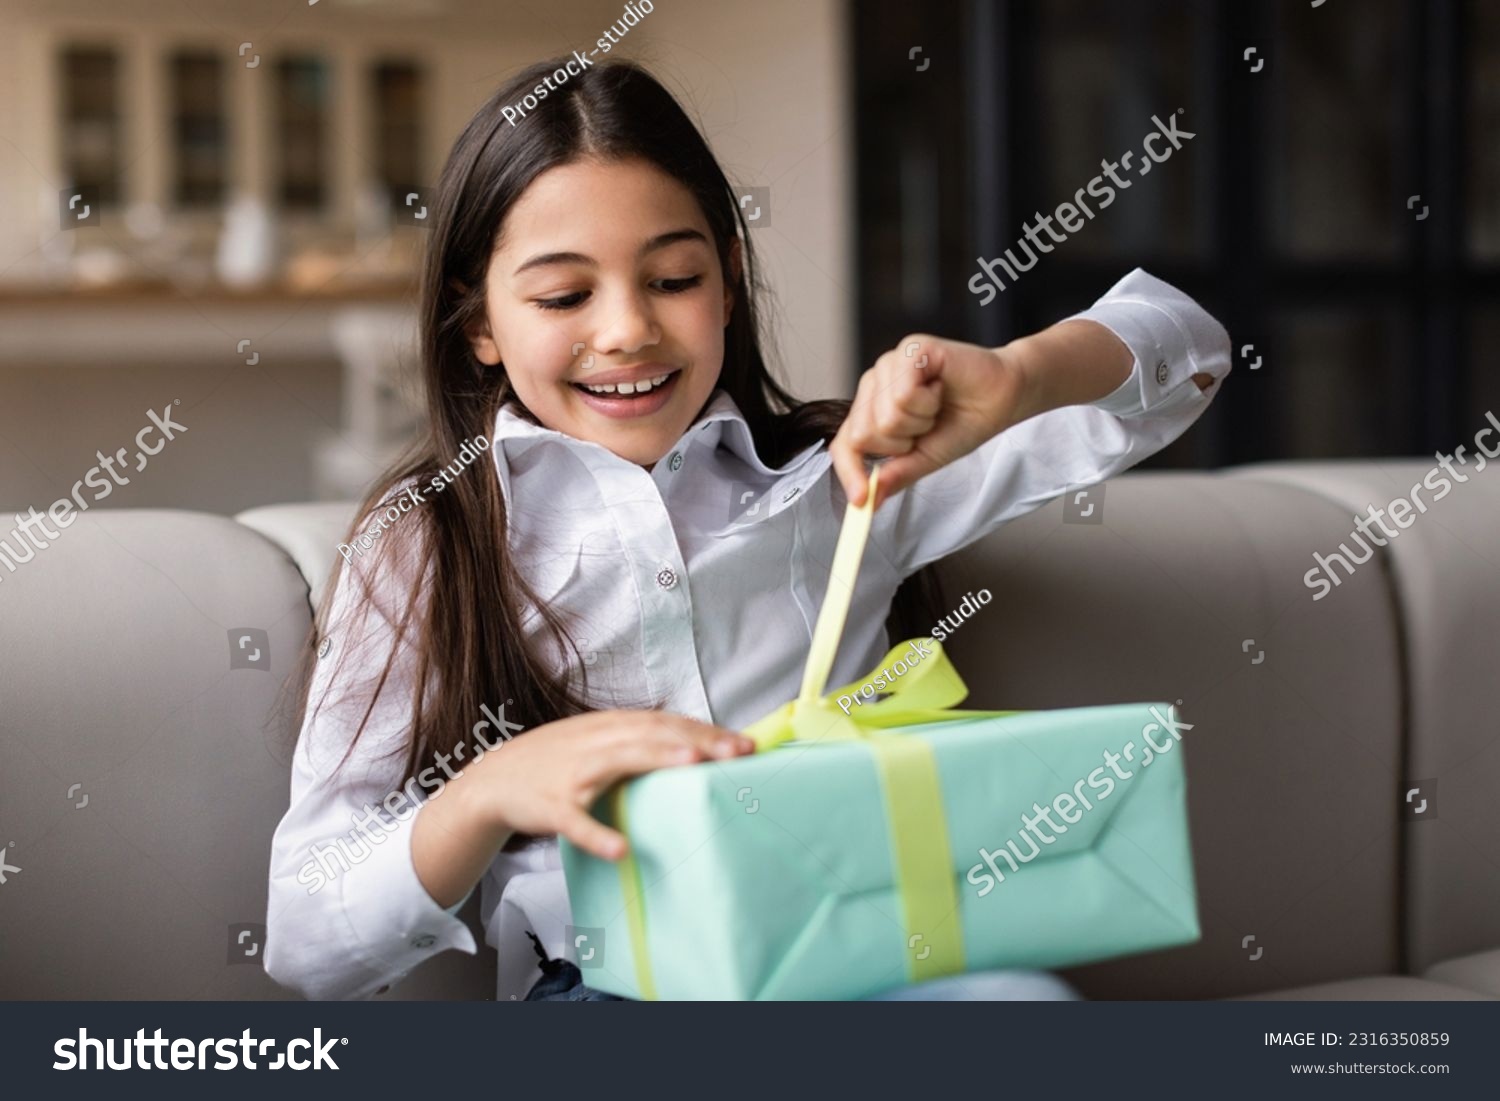 Birthday Gift. Happy Middle Eastern Kid Girl Opening Present Box Celebrating Holiday Sitting On Sofa At Home. Child Posing With Wrapped Gift. B-Day Celebration Concept. Selective Focus #2316350859